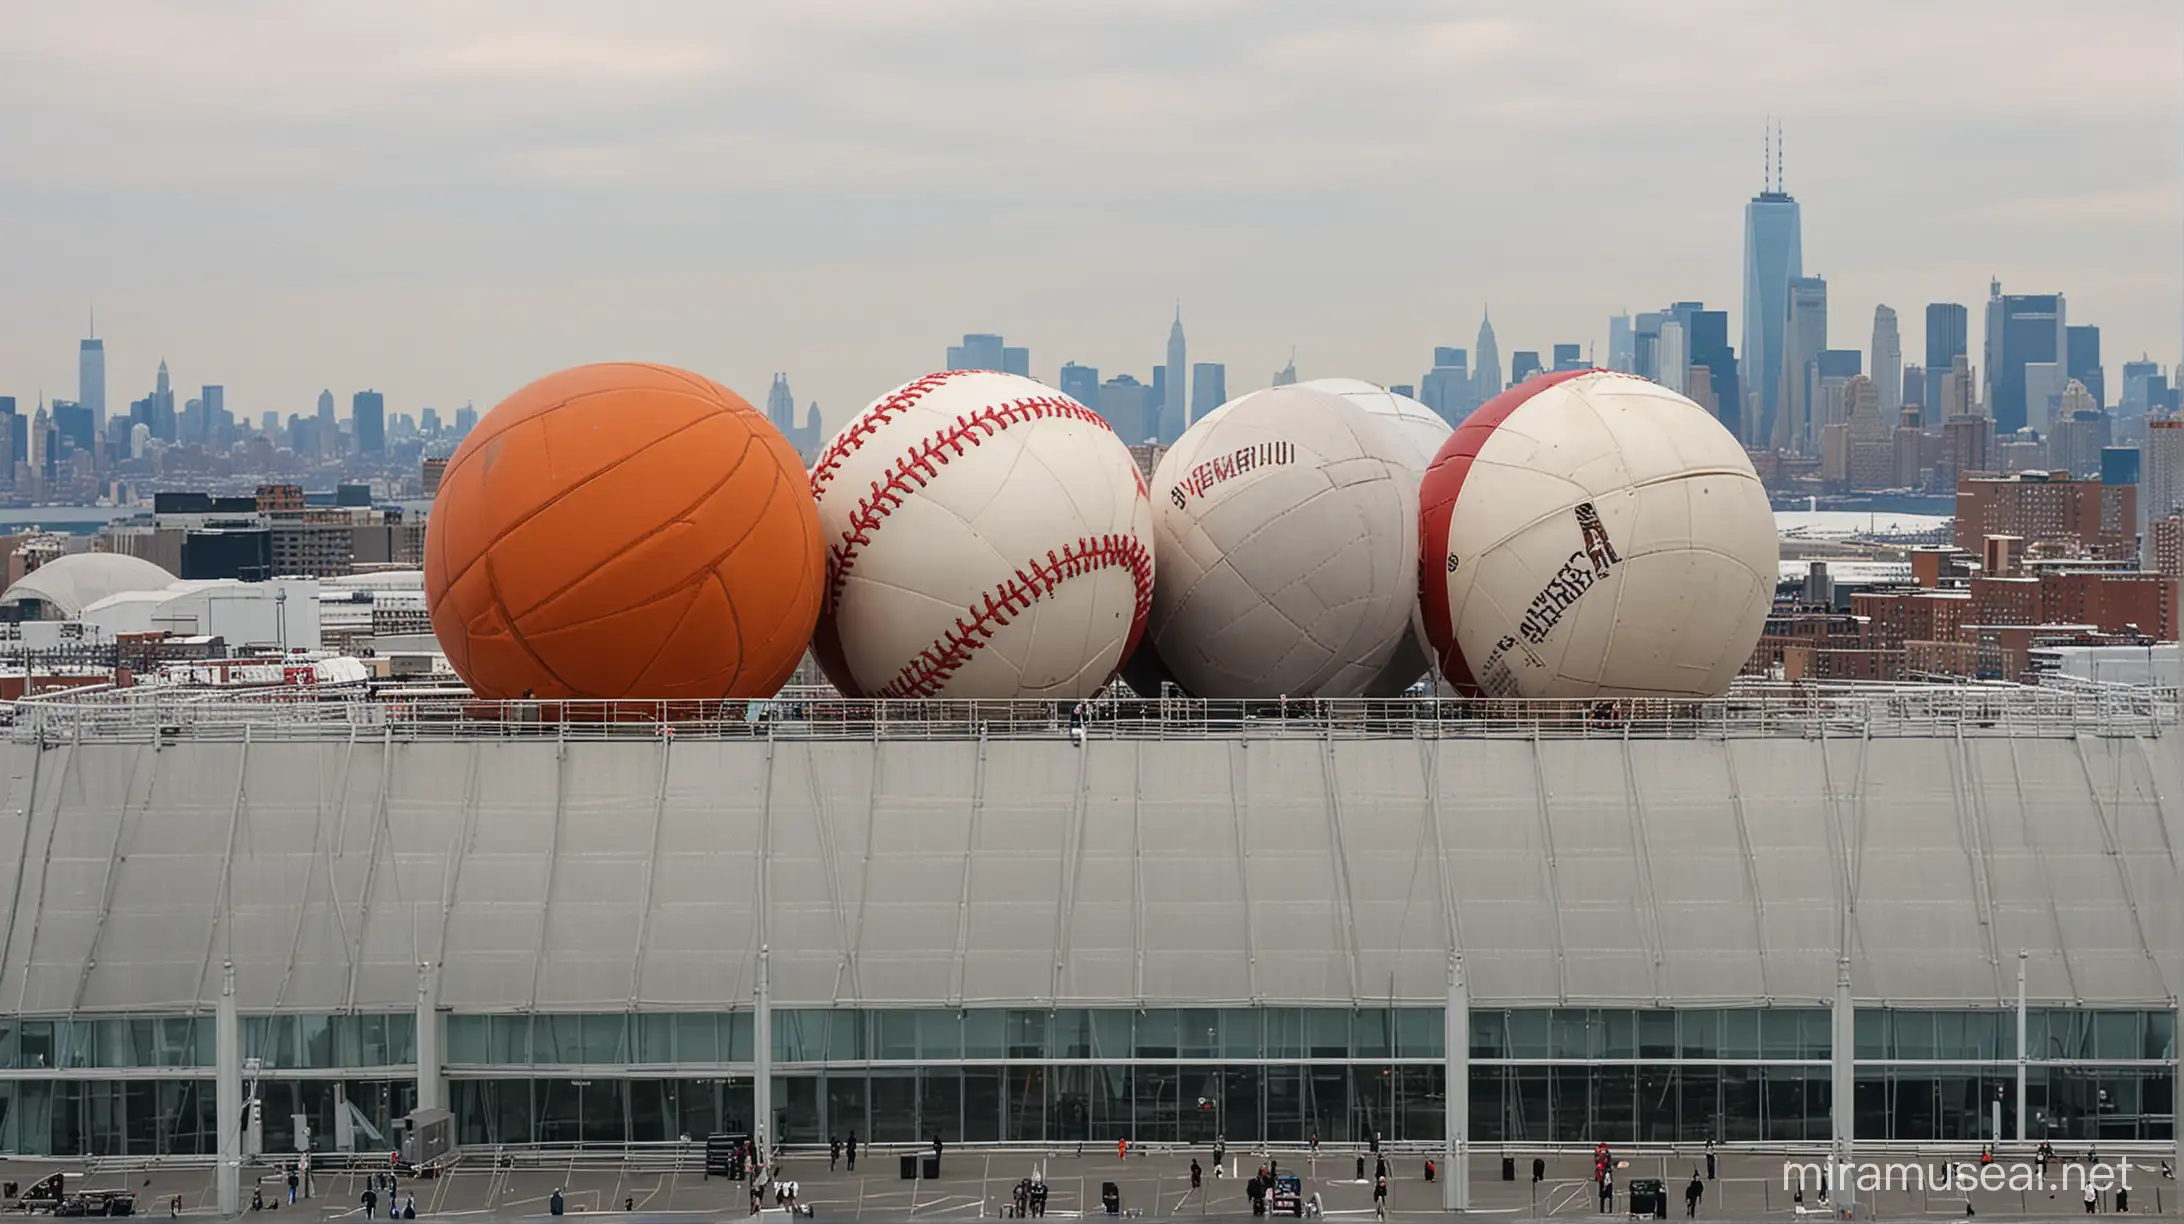 Giant Sports Balls Adorn Javits Convention Center in New York City